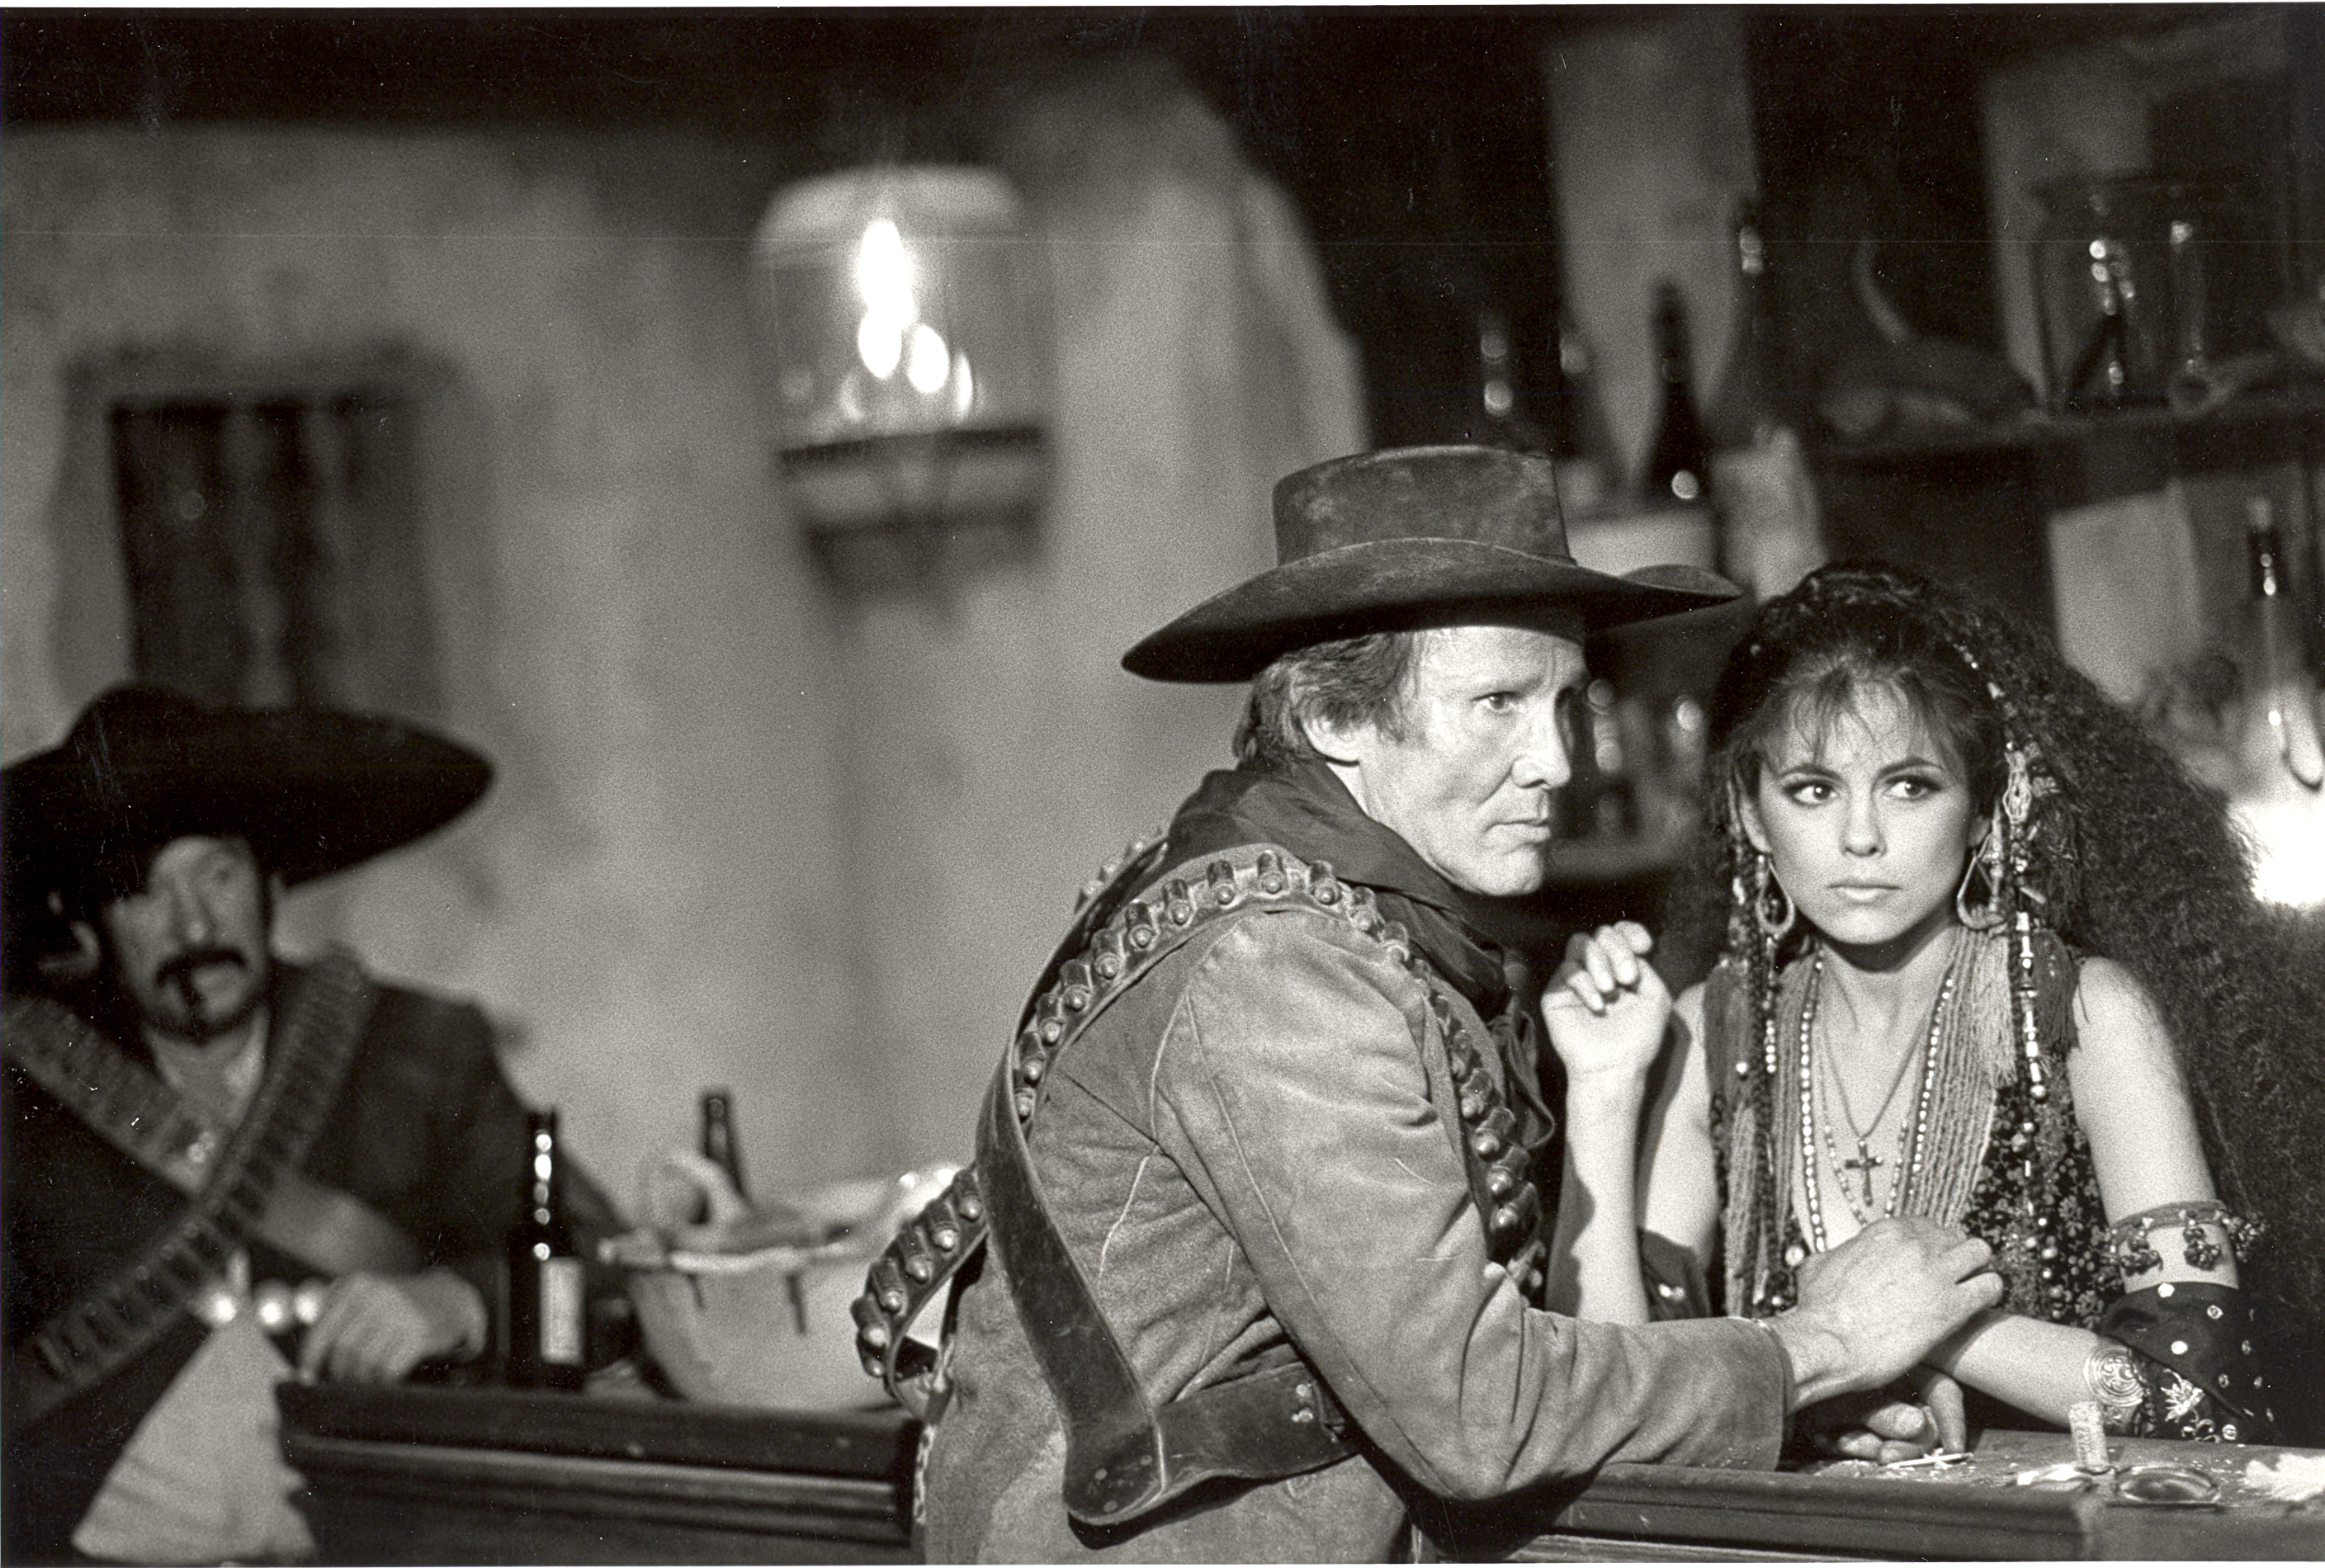 Henry Silva, Gina Gallego - Lust in the Dust (New World Pictures)